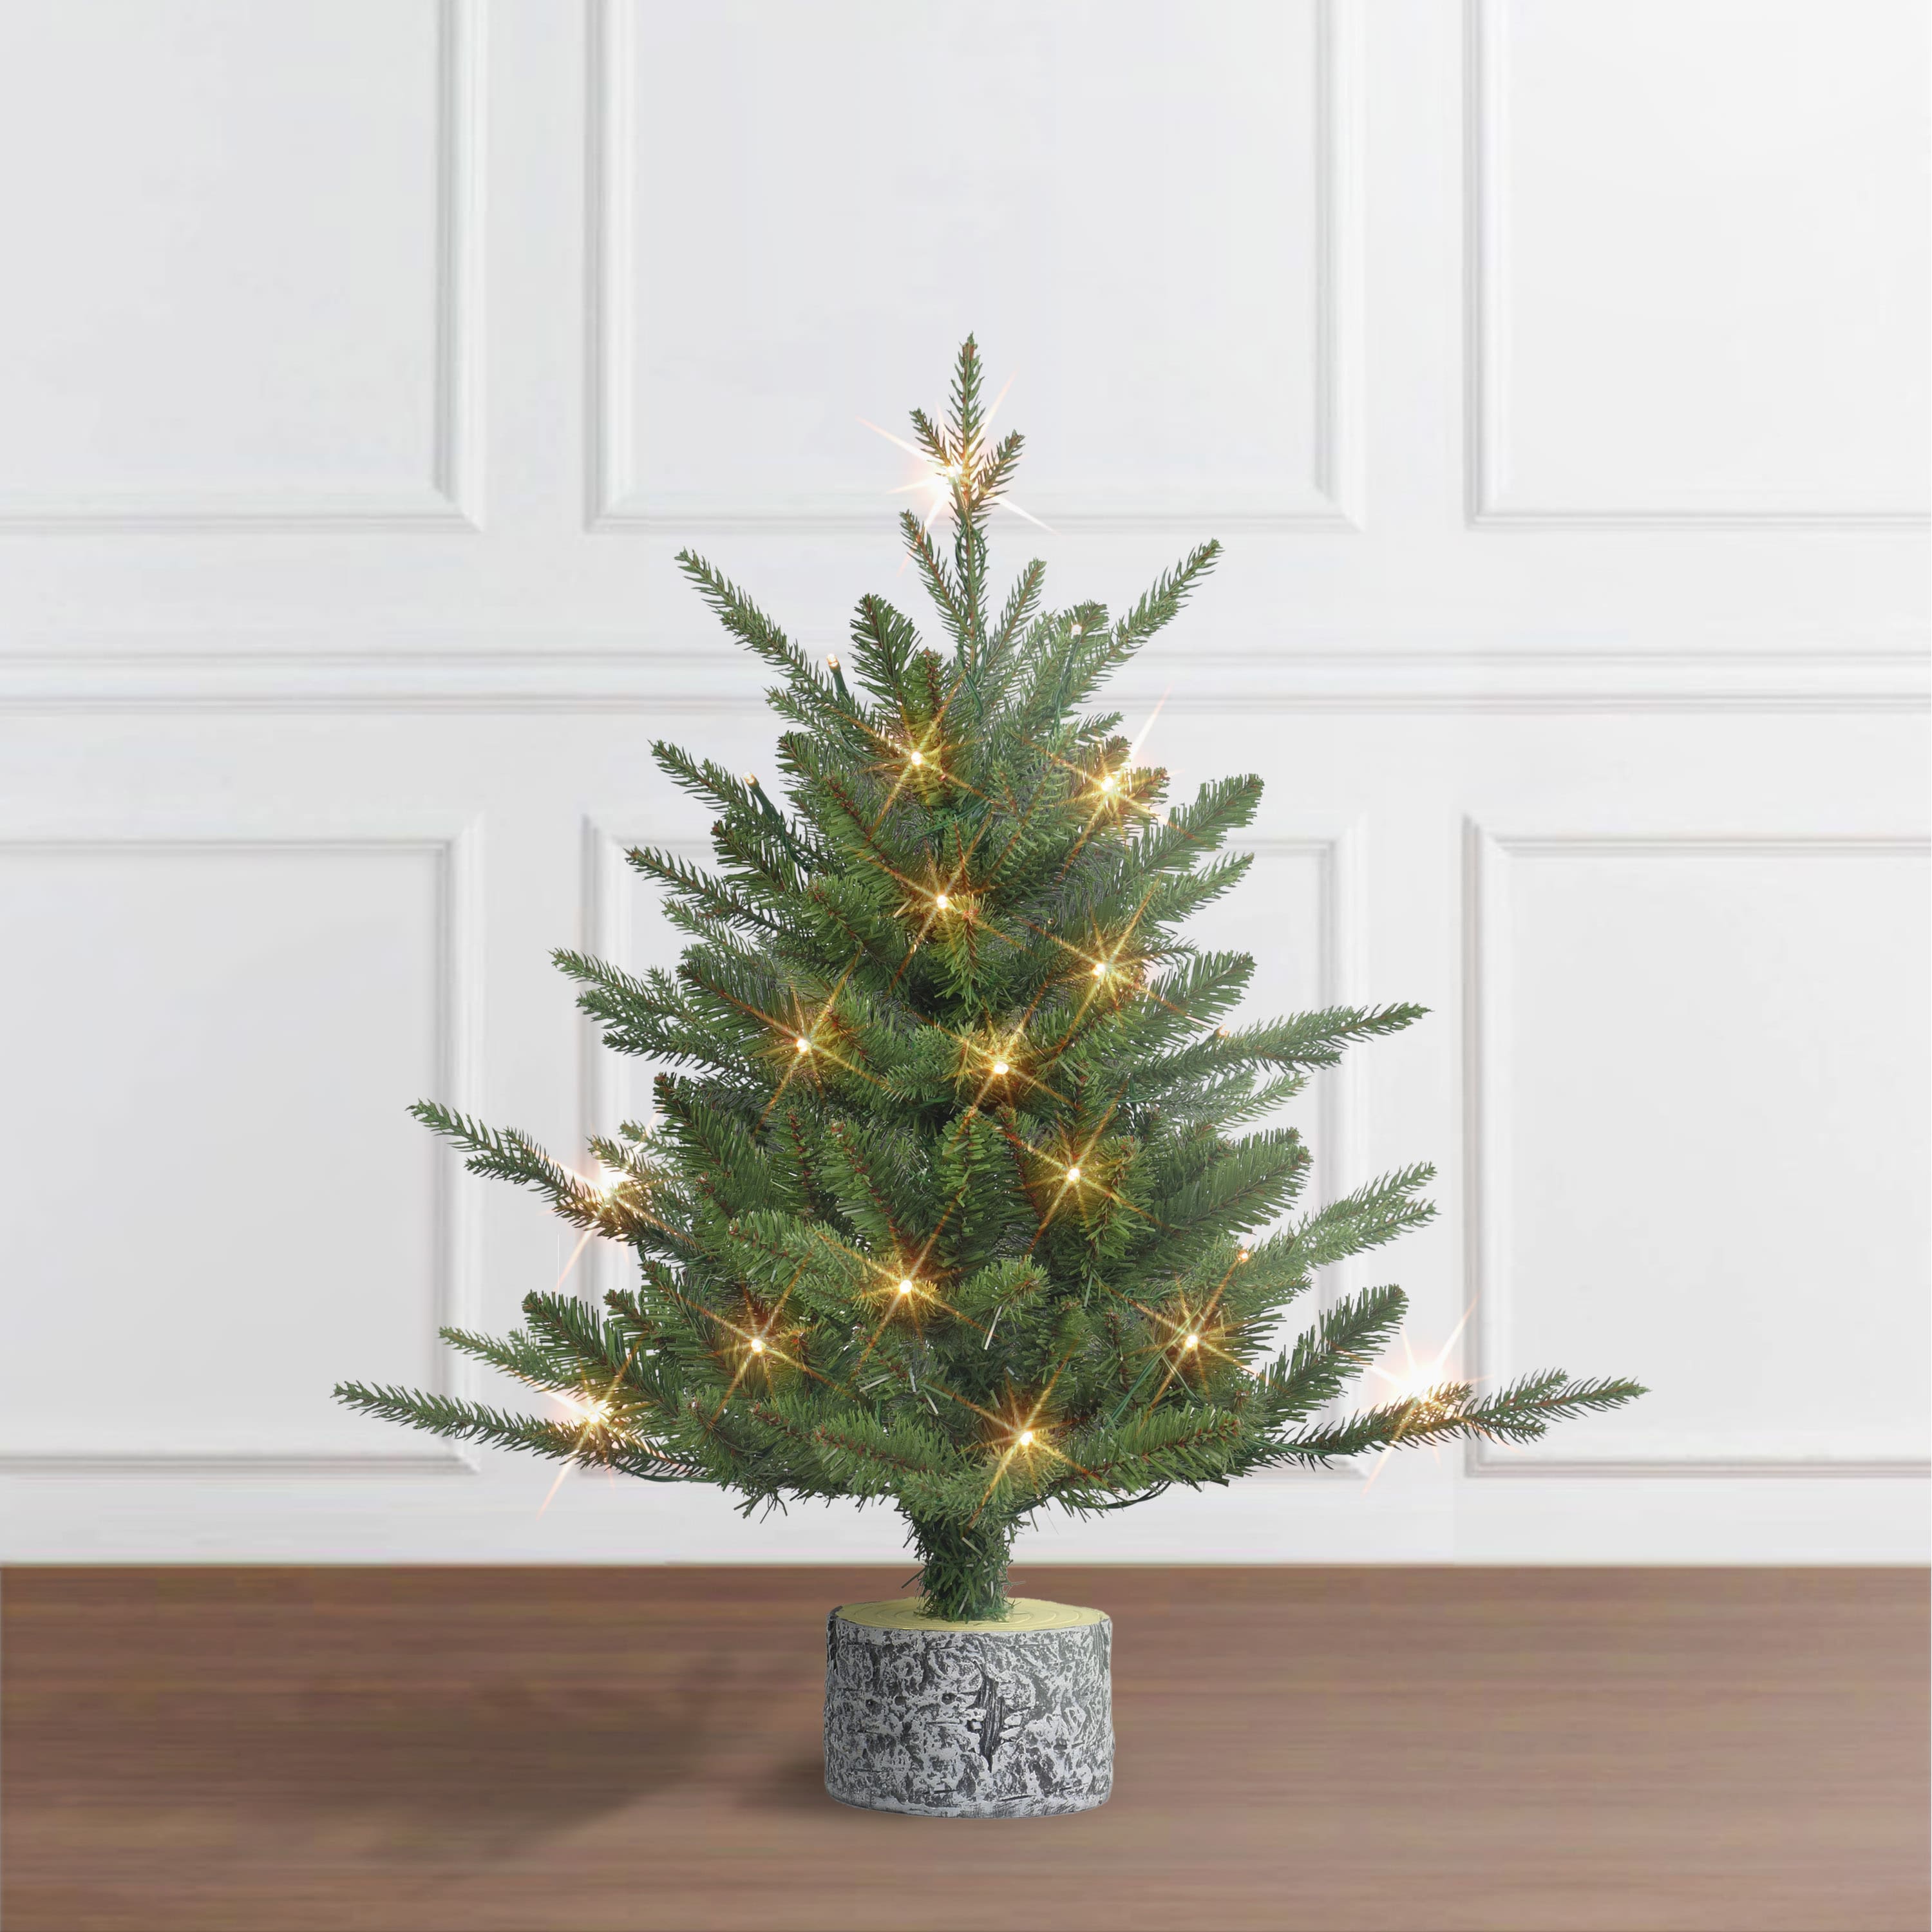 6 Pack: 2ft. Pre-Lit Artificial Christmas Tree in Stump Planter, Warm White LED Lights